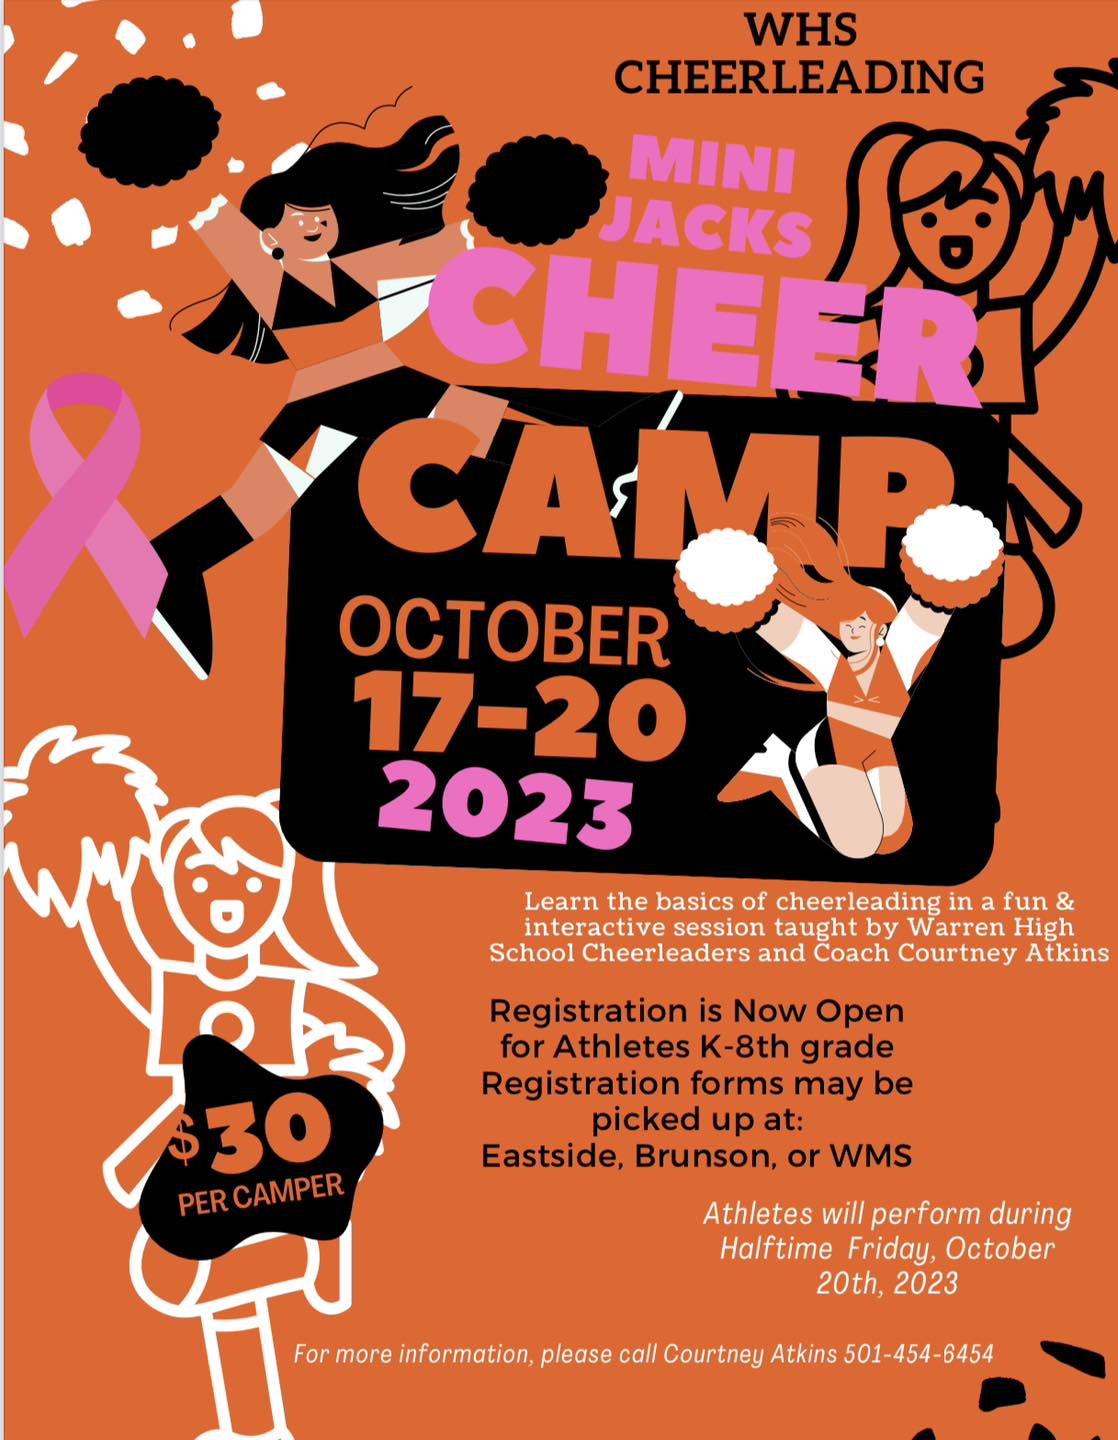 Mini Jacks Cheer Camp scheduled for October 17-20